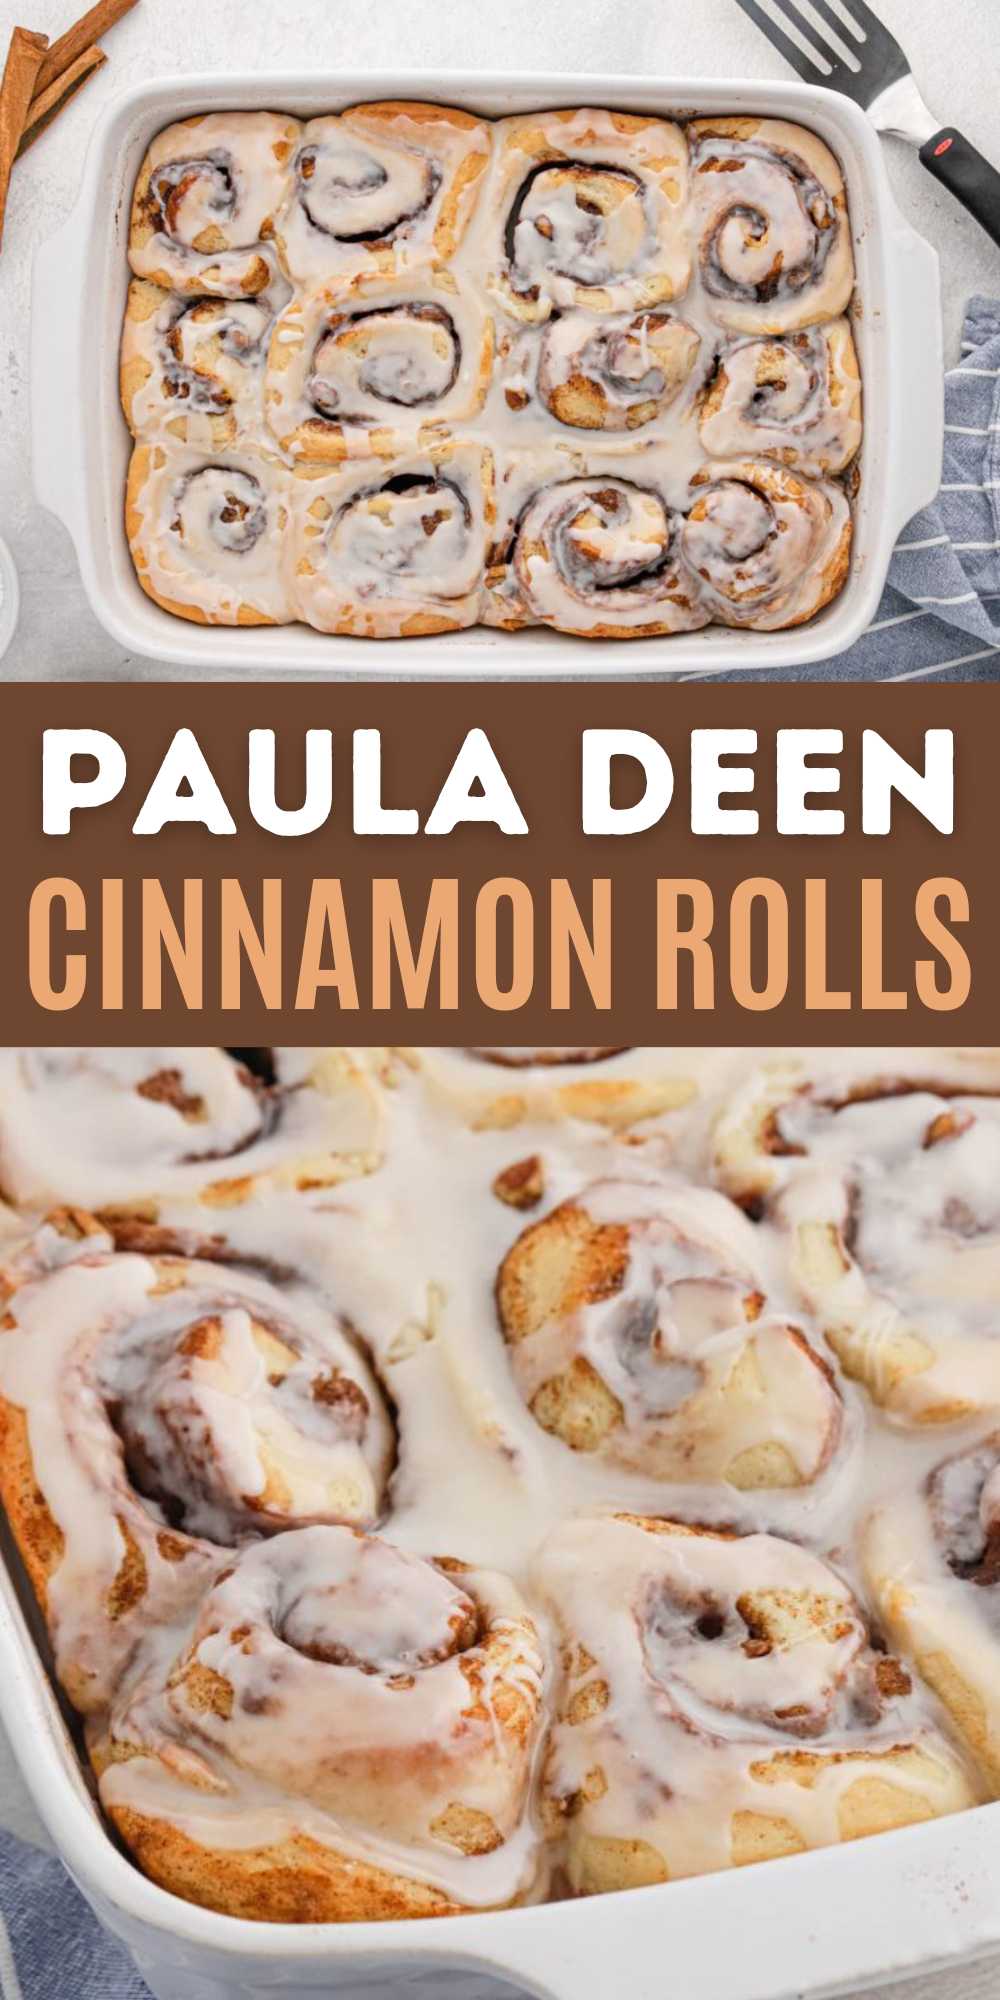 Paula Deen Cinnamon Rolls is the cinnamon roll recipes to make. It loaded with amazing flavor and simple to make. Cinnamon rolls is the perfect way to start the day. Add a side of bacon and fresh fruit for a complete breakfast idea. #eatingonadime #pauladeencinnamonrolls #cinnamonrollsrecipe